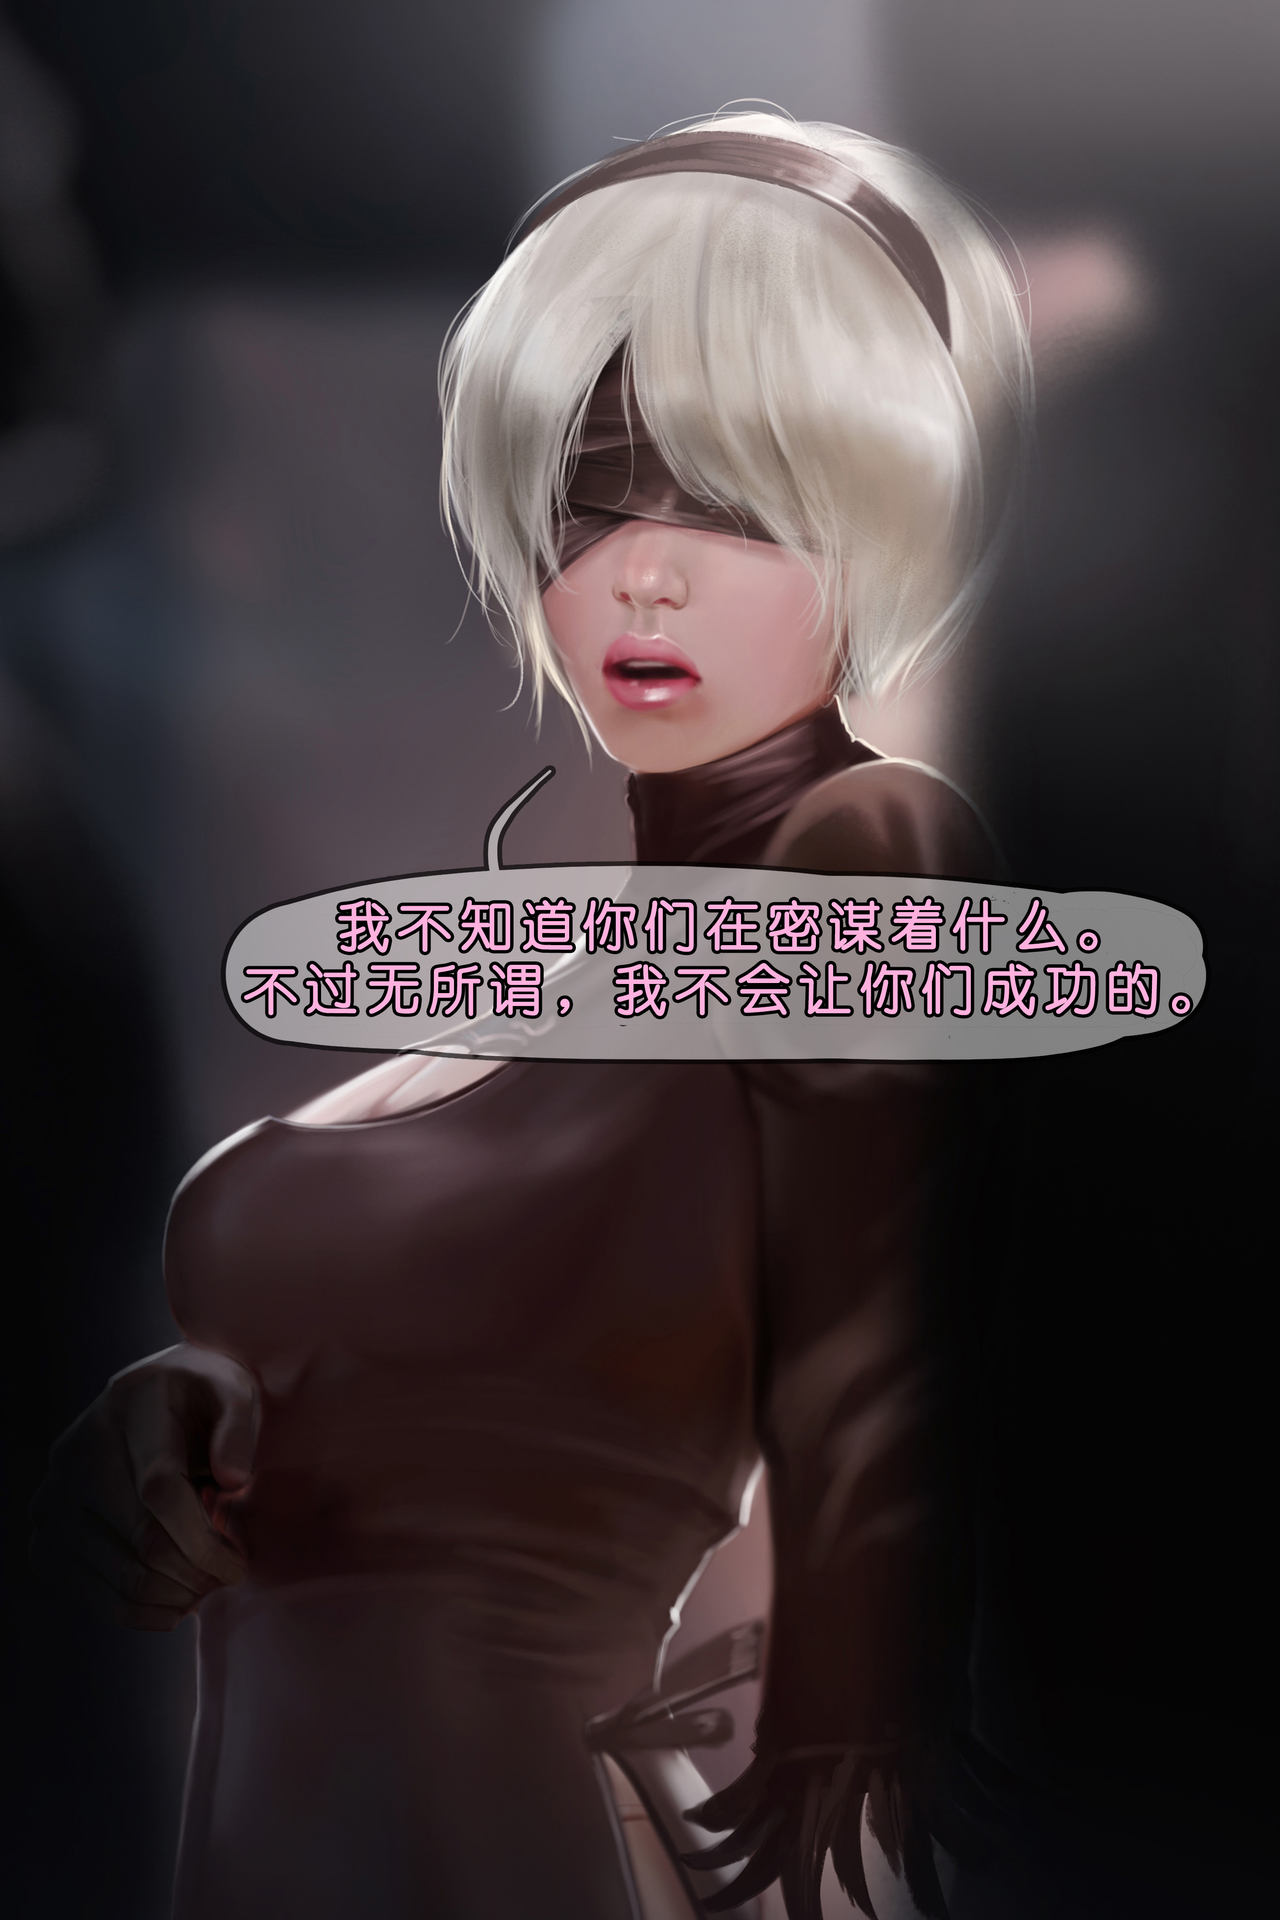 [Firolian] 2B - You Have Been Hacked! (NieR:Automata) [Chinese] [Menethil个人汉化] [Firolian] 2B - You Have Been Hacked! (ニーア オートマタ) [中国翻訳]